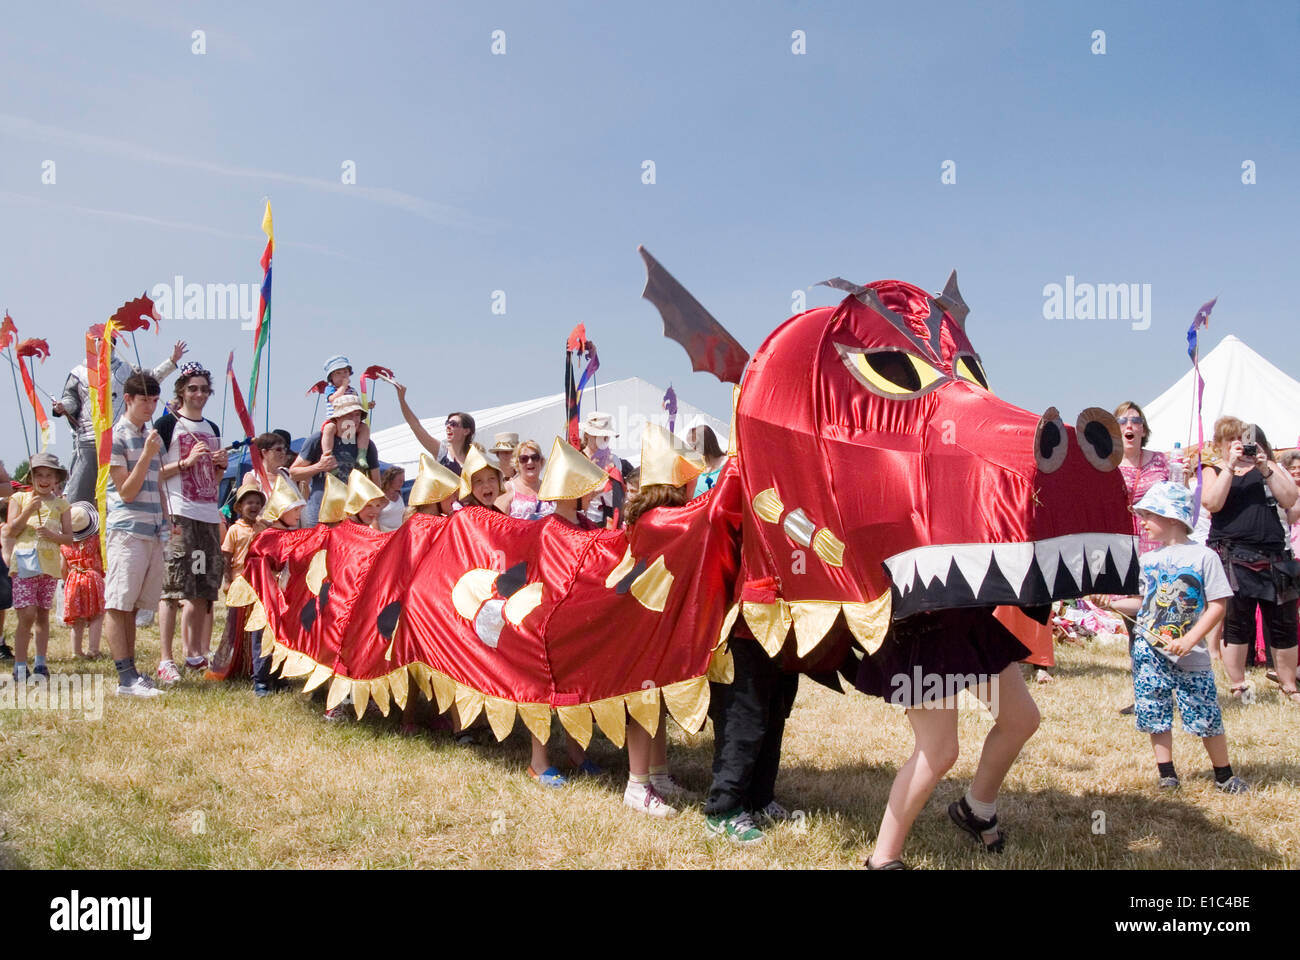 Tewkesbury Medieval Festival, Gloucester UK July 2013: alchemy entertain children with giant puppet dragon at the dragon parade Stock Photo